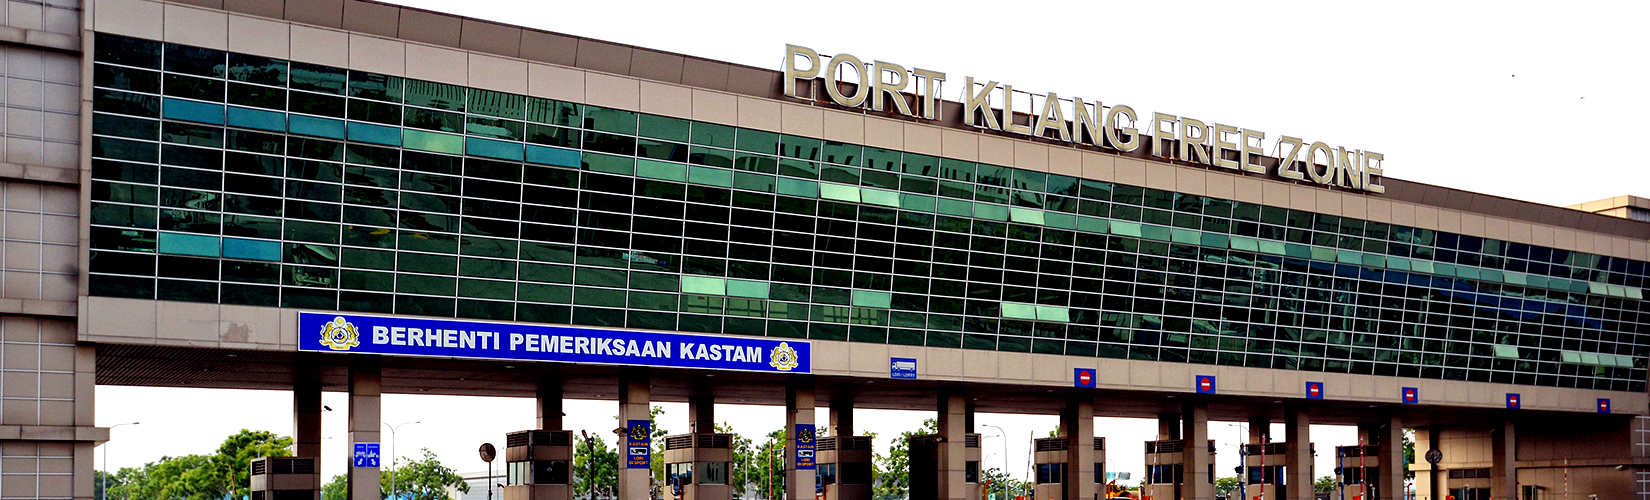 The ironically very expensive Port Klang Free Zone. Image from PKFZ